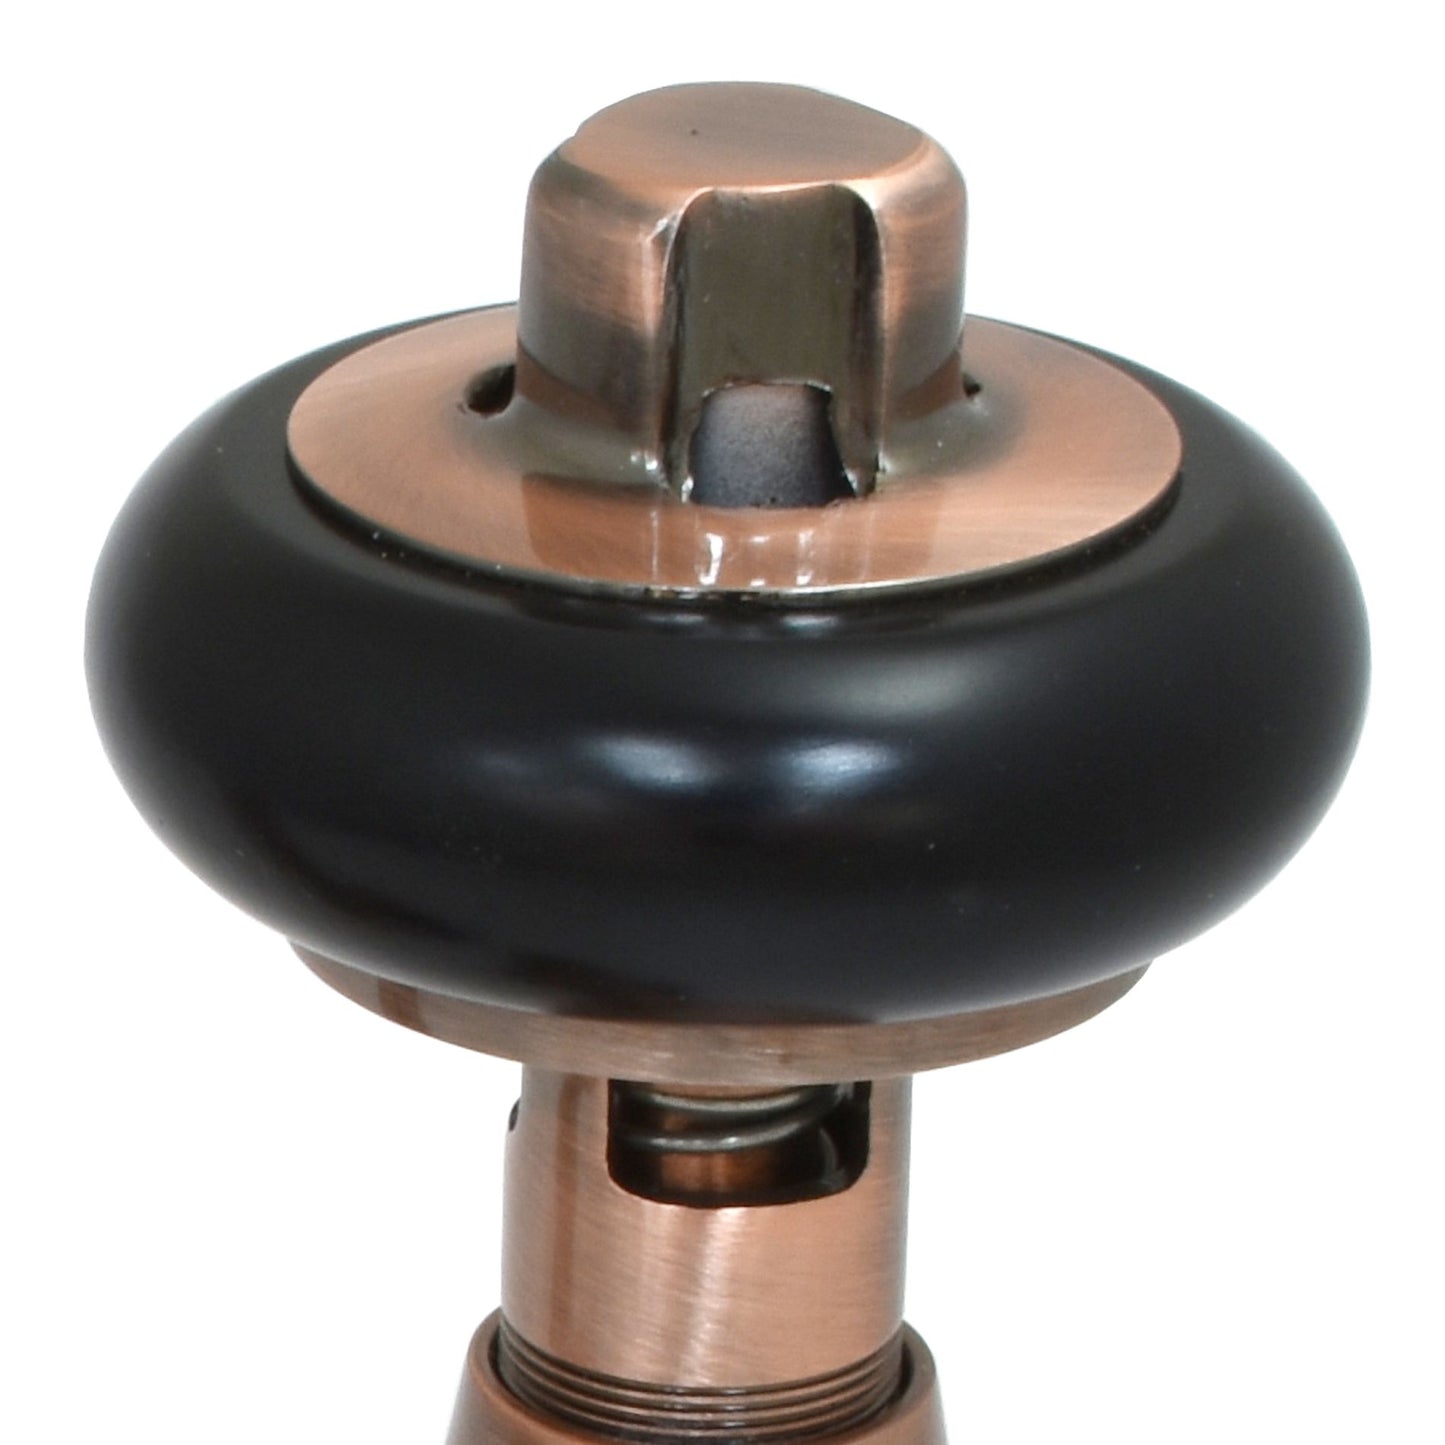 Oakfield Traditional Manual Radiator Valve Angled - Antique Copper